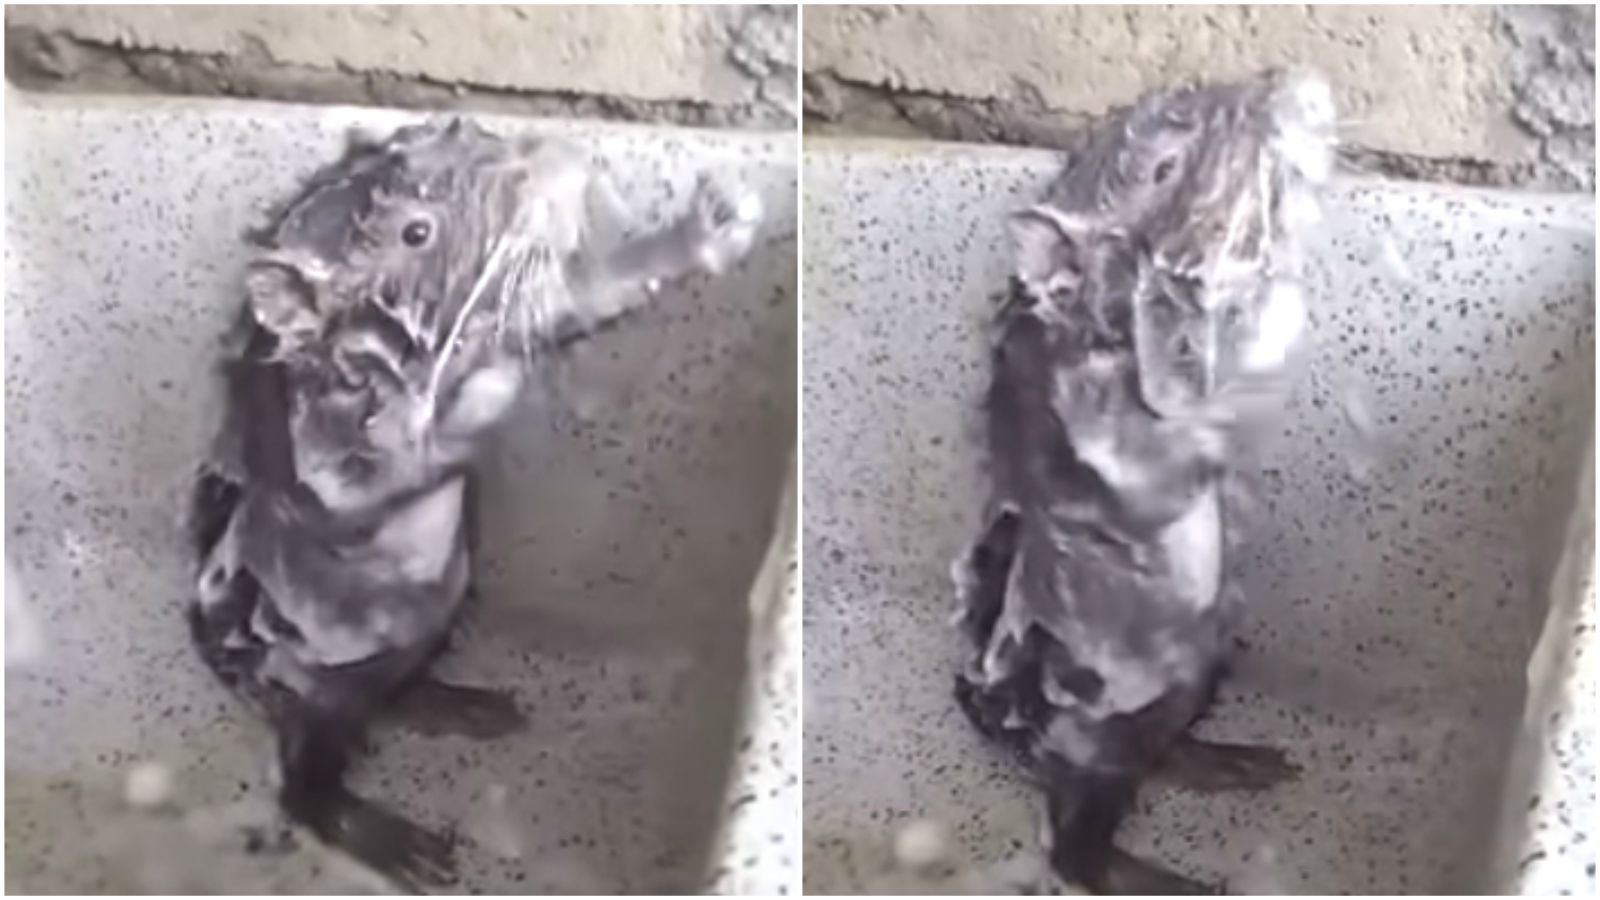 This ‘Shower Rat’ Washing Itself Is the Cutest Thing Ever but It’s Not a Rat